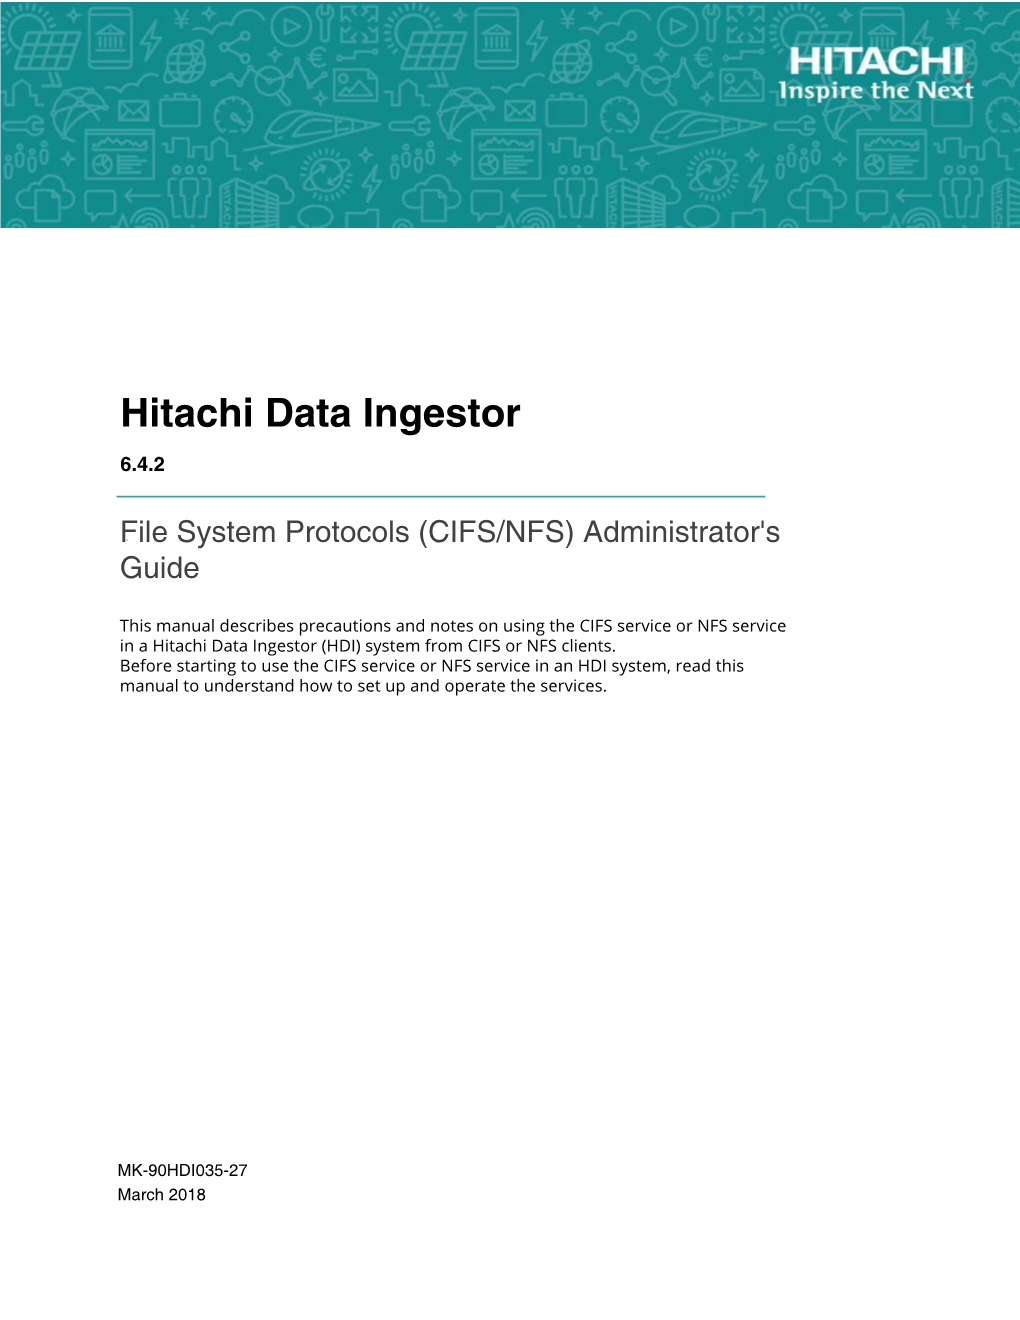 File System Protocols (CIFS/NFS) Administrator's Guide